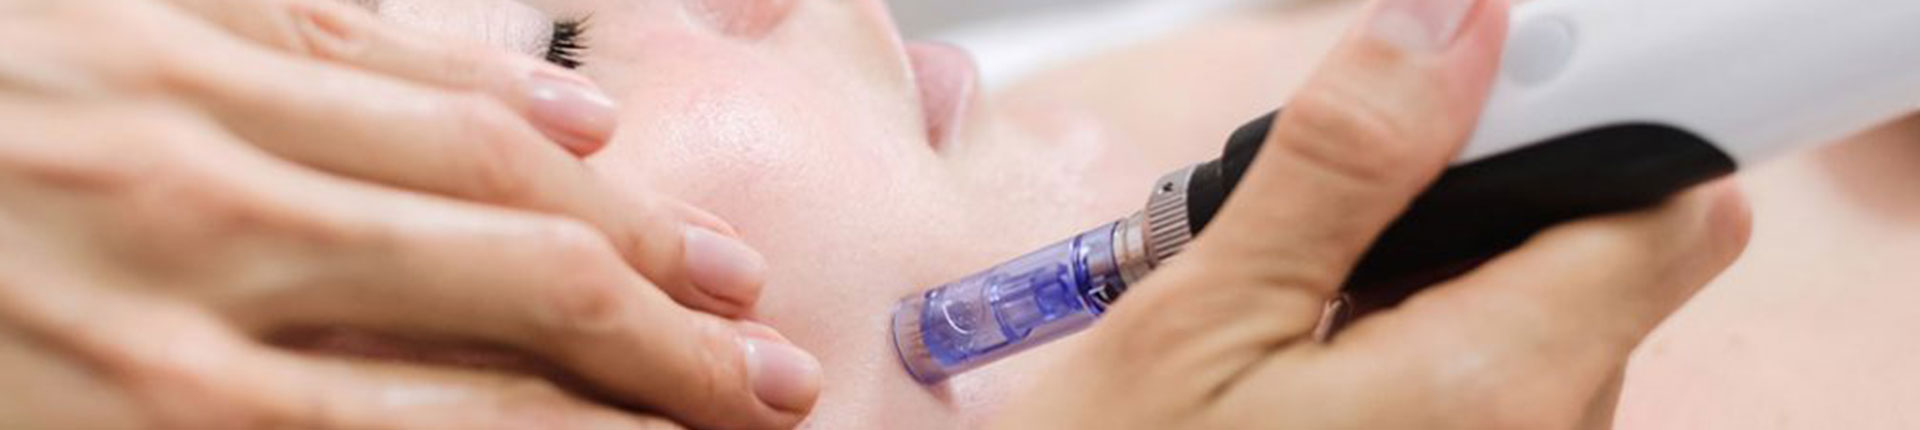 A woman is having microneedling treatment